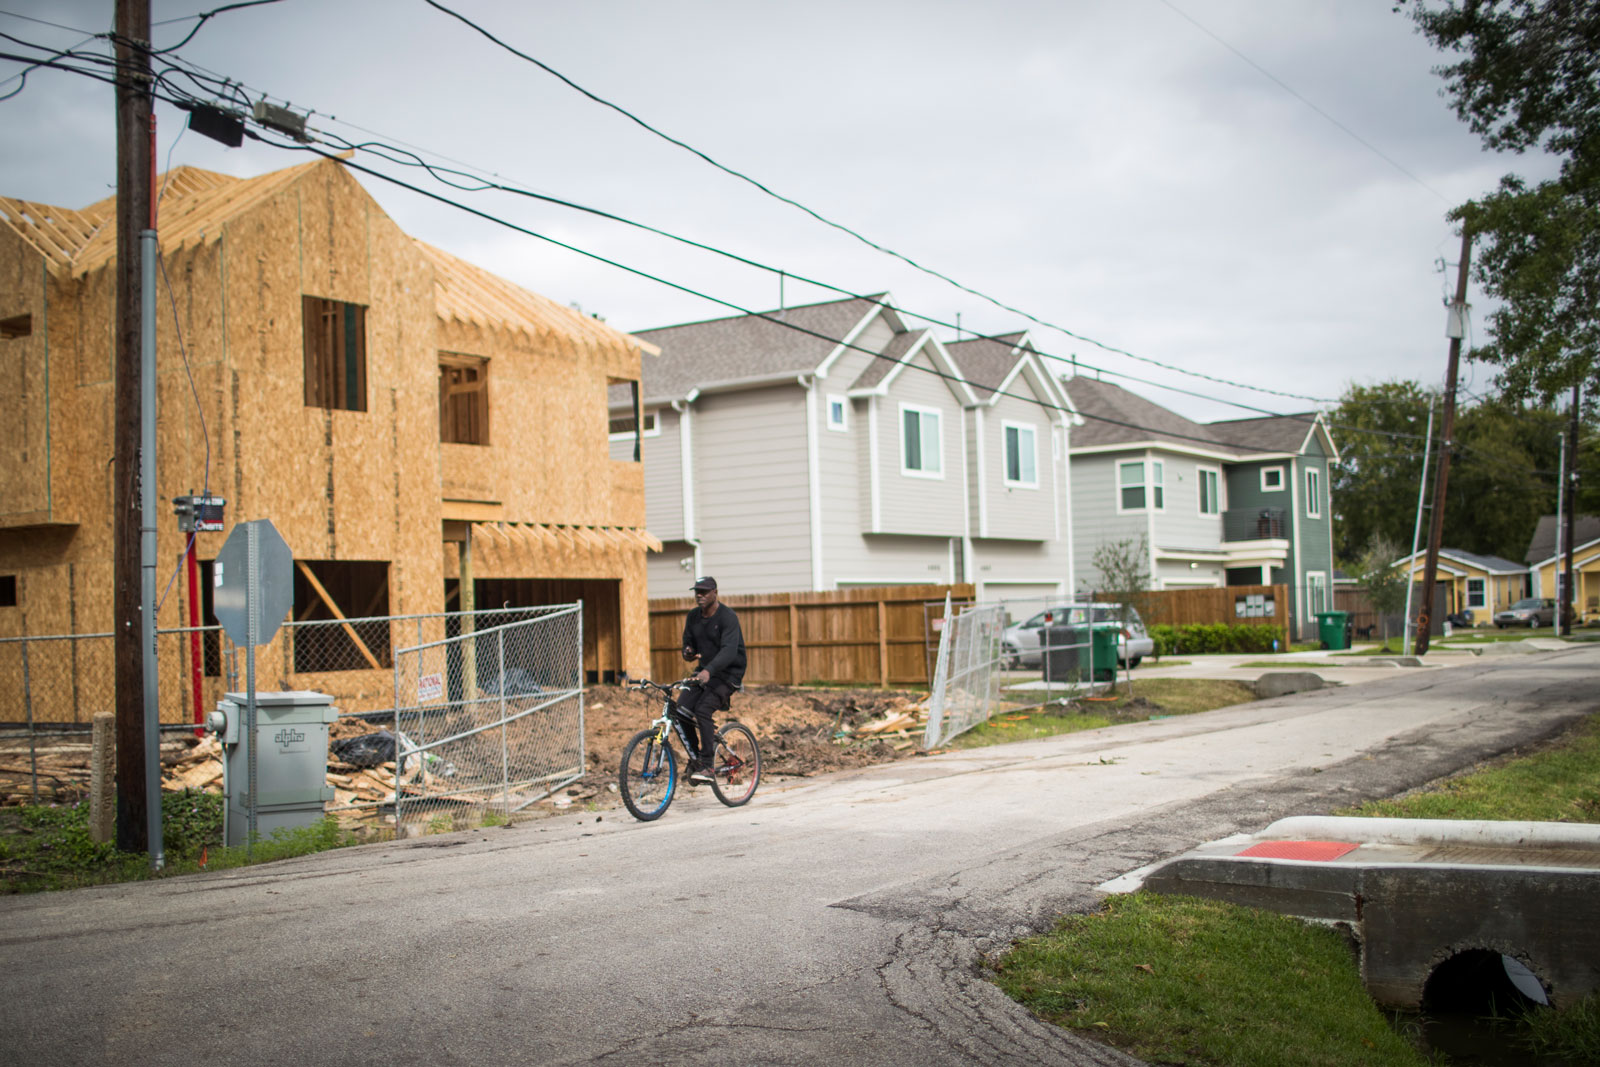 A person bikes past a row of new homes, one still under construction